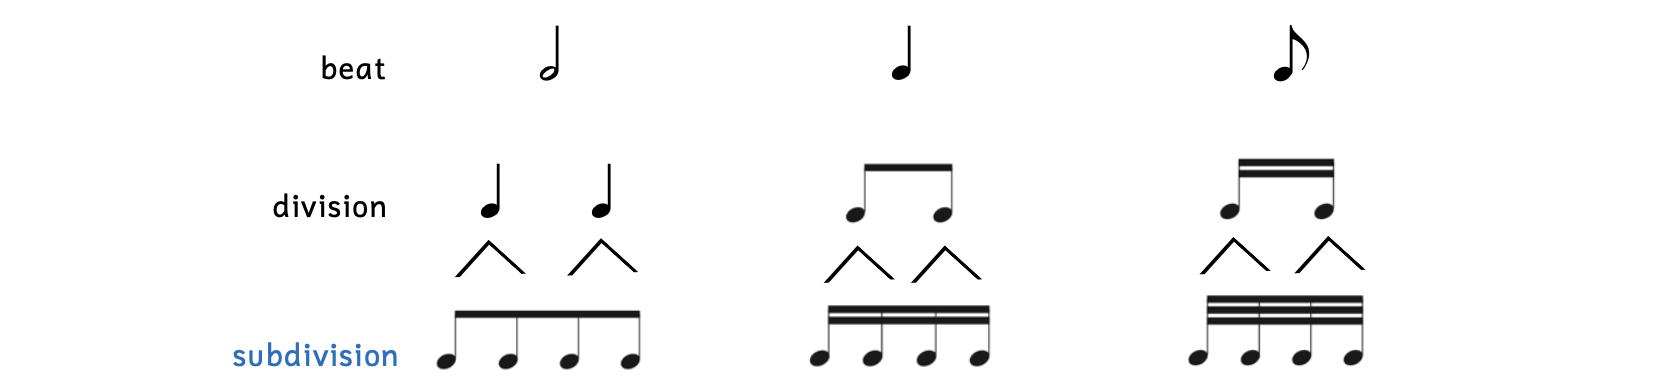 Illustration of how beats divide into divisions and subdivisions. A half note beat is divided into two quarter notes and subdivided into four eighth notes, which are beamed together with a single beam. The quarter note beat is divided into two eighth notes, which are beamed together with a single beam, and subdivided into four sixteenth notes, which are beamed together with two beams. The eighth note beat is divided into two sixteenth notes, which are beamed together with two beams, and subdivided into four thirty-second notes, which are beamed together with three beams.